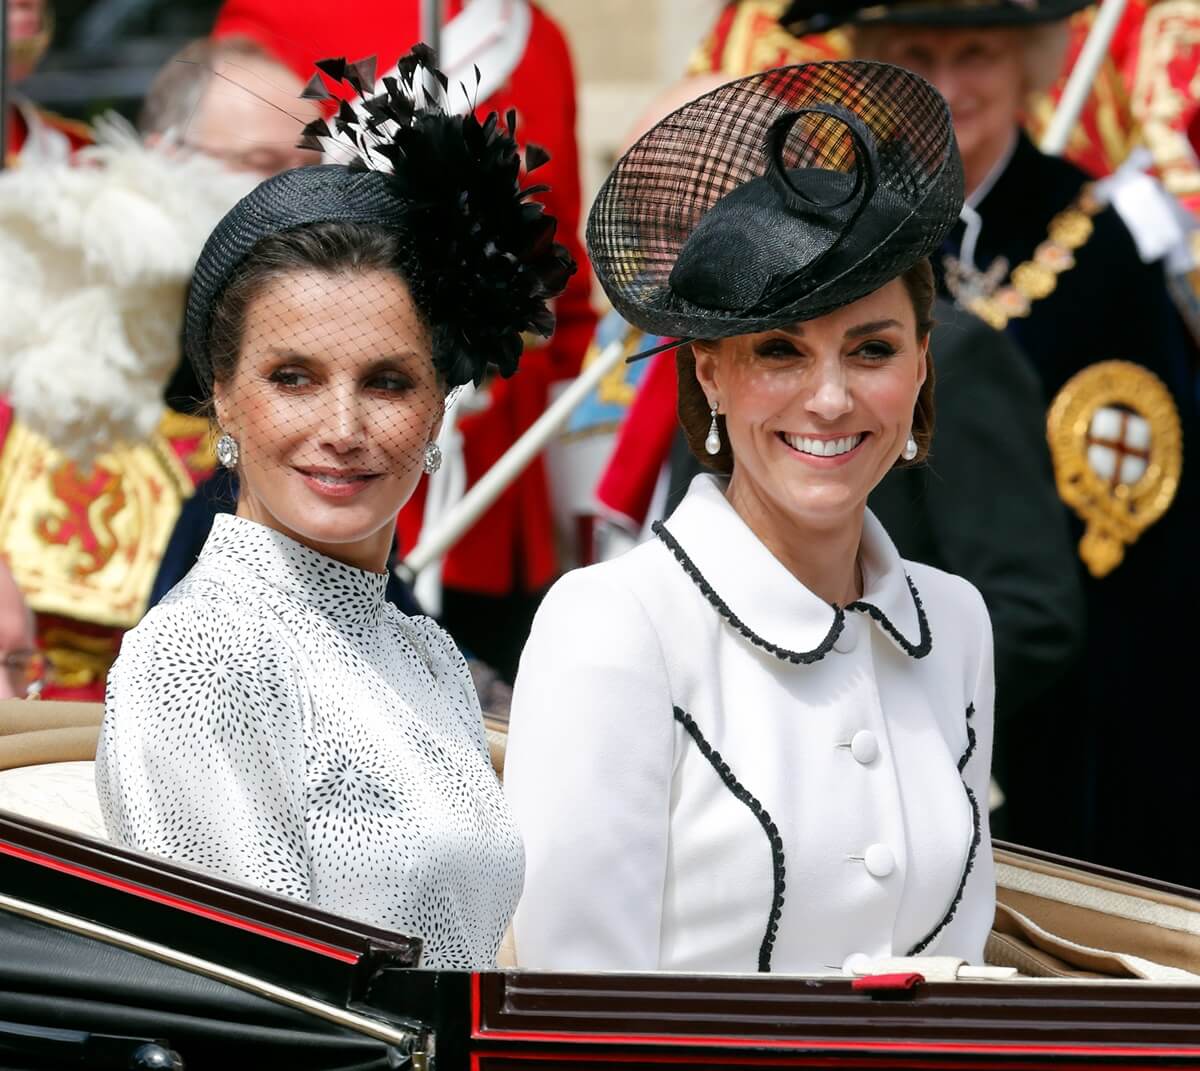 Queen Letizia of Spain and Kate Middleton attend the Order of the Garter service at St. George's Chapel